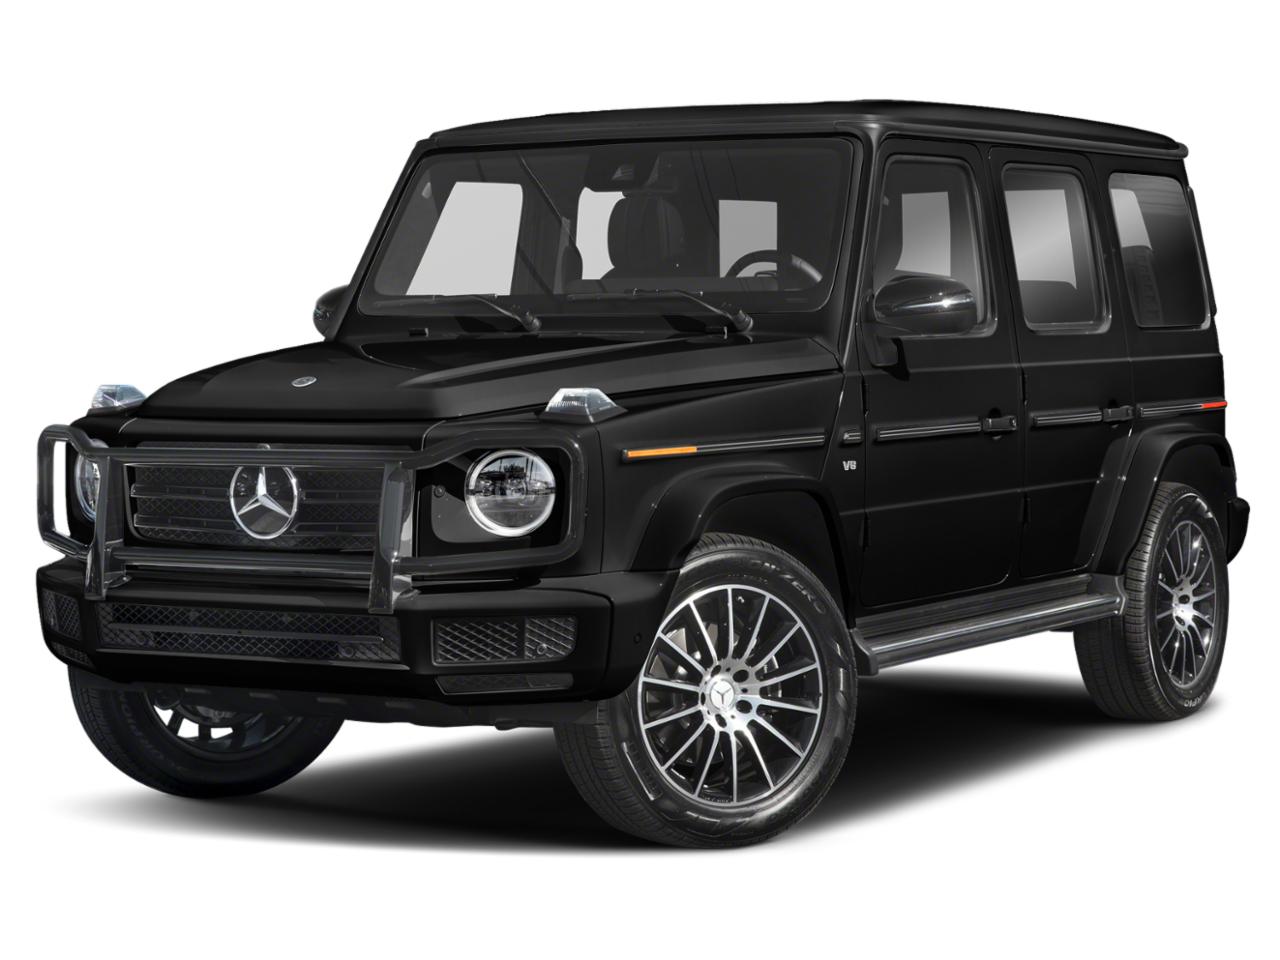 New 2022 Mercedes Benz G Class Black (With Photo) G 550 4MATIC SUV: W1NYC6BJ3NX446542